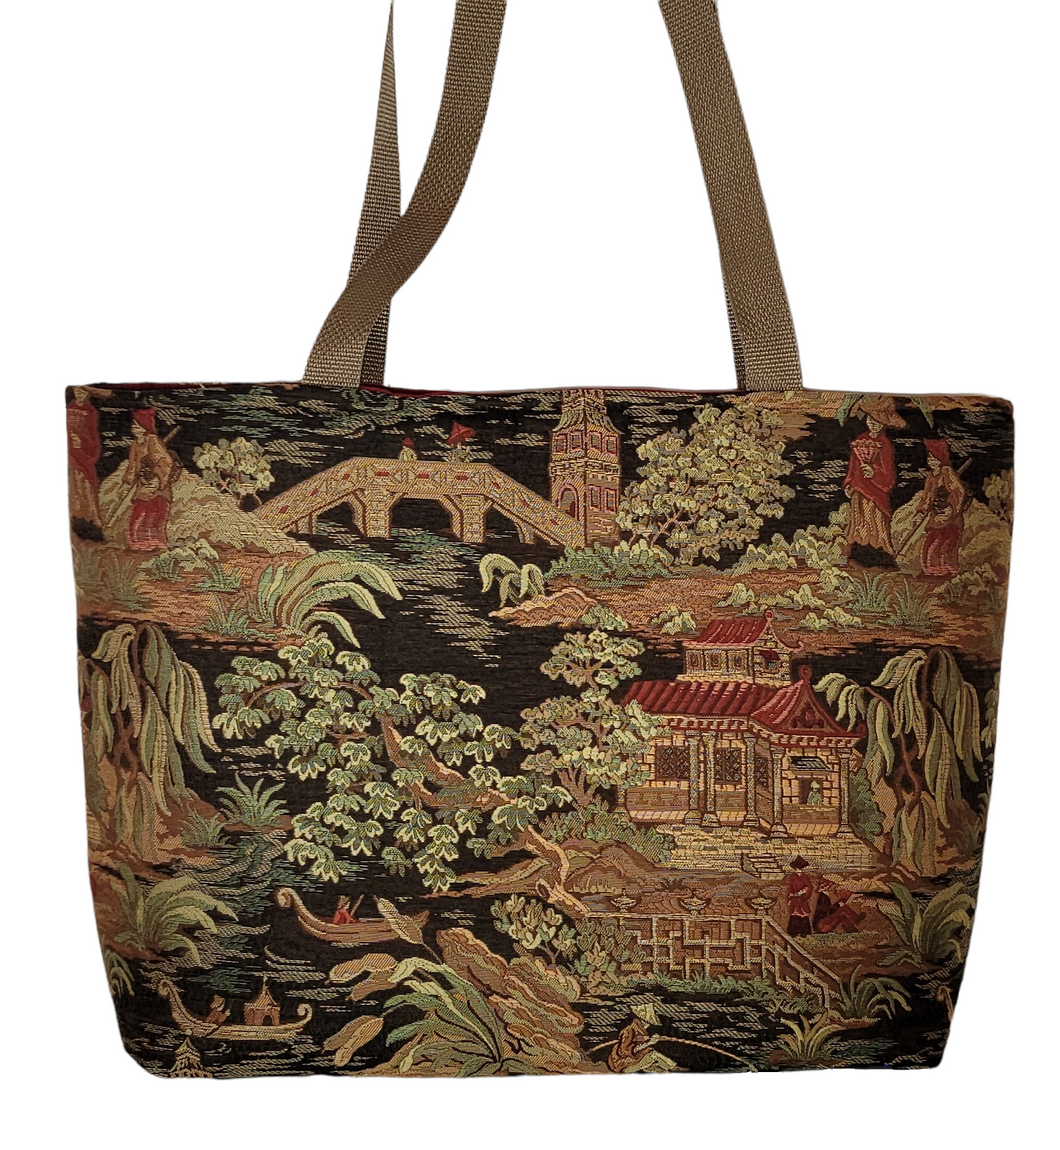 Handcrafted Asian Inspired Tote Bag